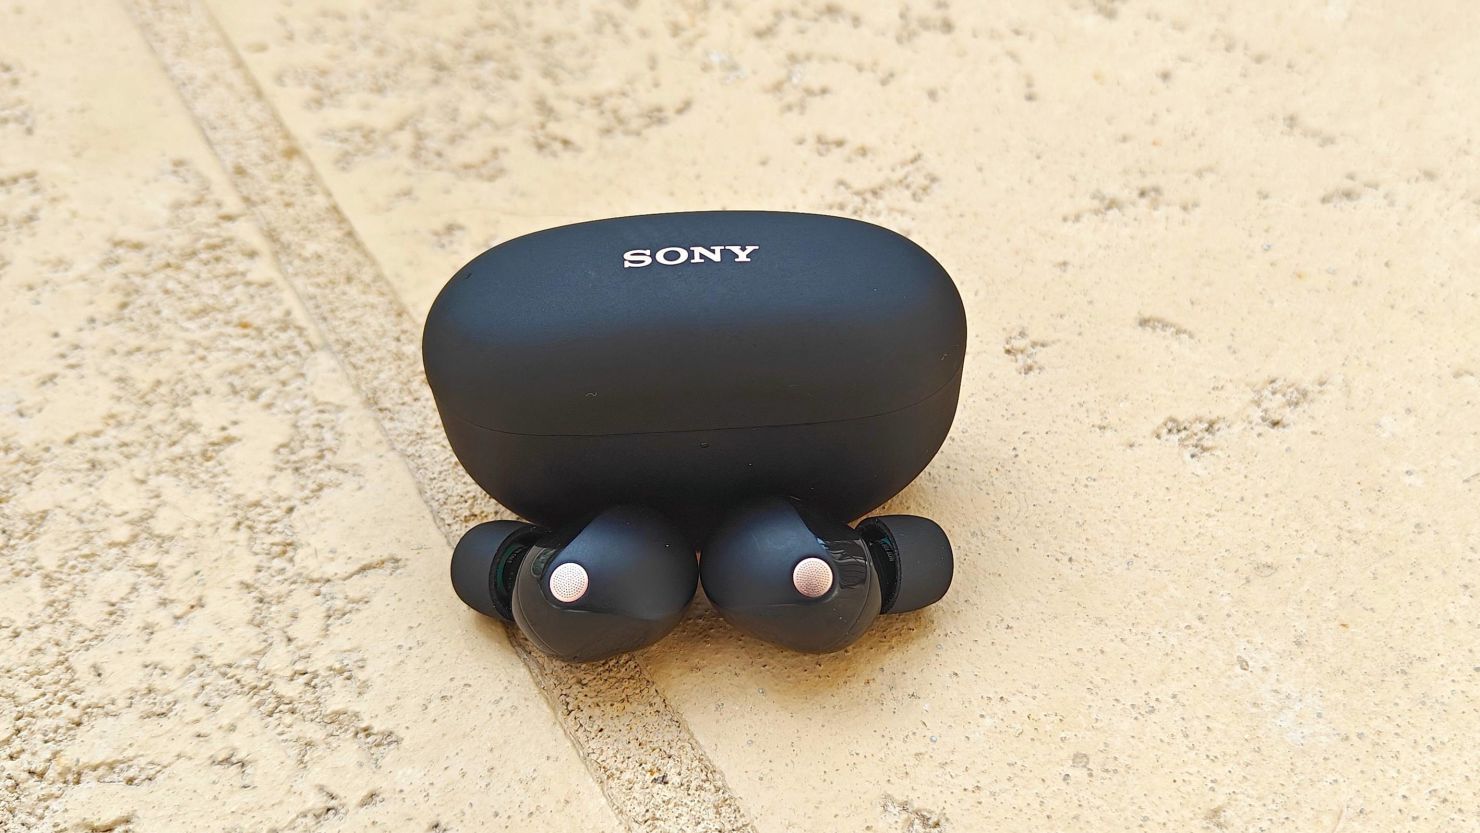 Sony WF-1000XM3 review: updated noise-cancelling earbuds sound great, Sony